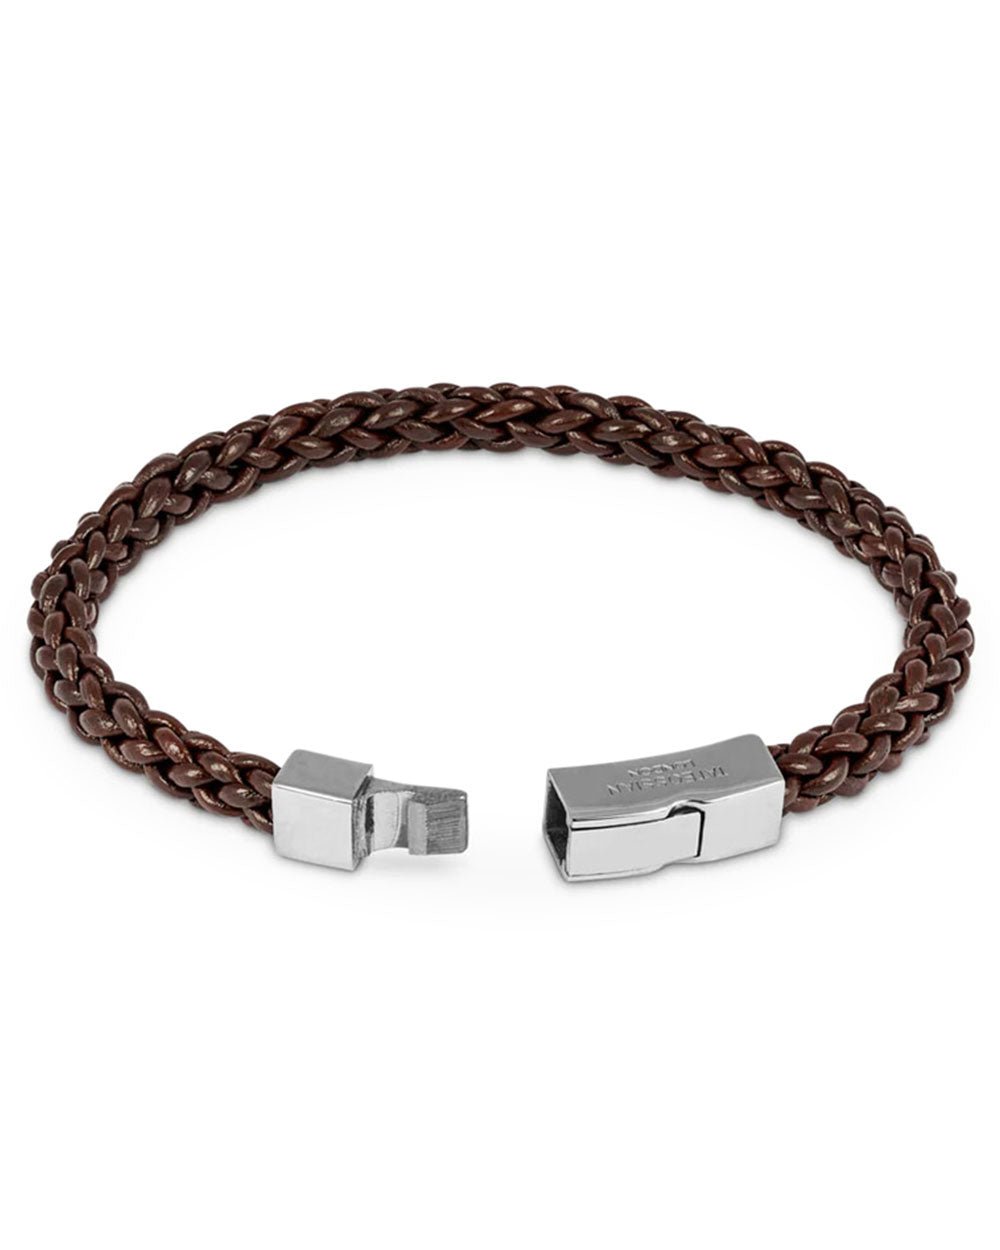 Silver and Brown Braided Leather Click Trenza Bracelet